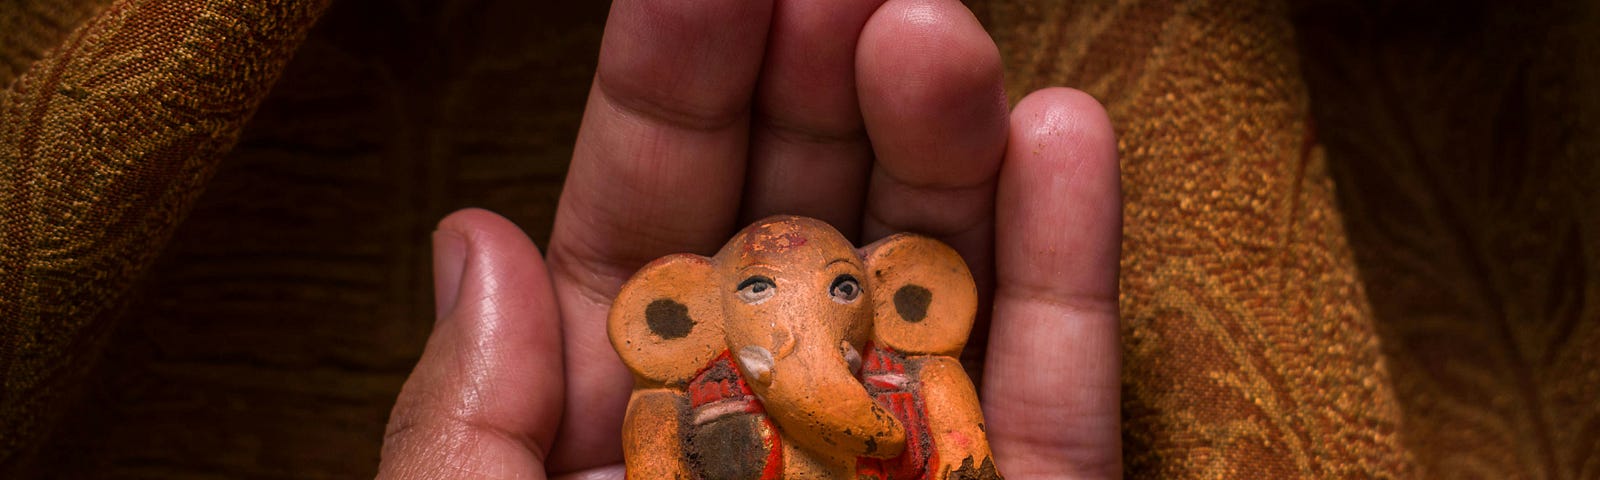 a hand holding a small statue of Ganesh, an elephant god